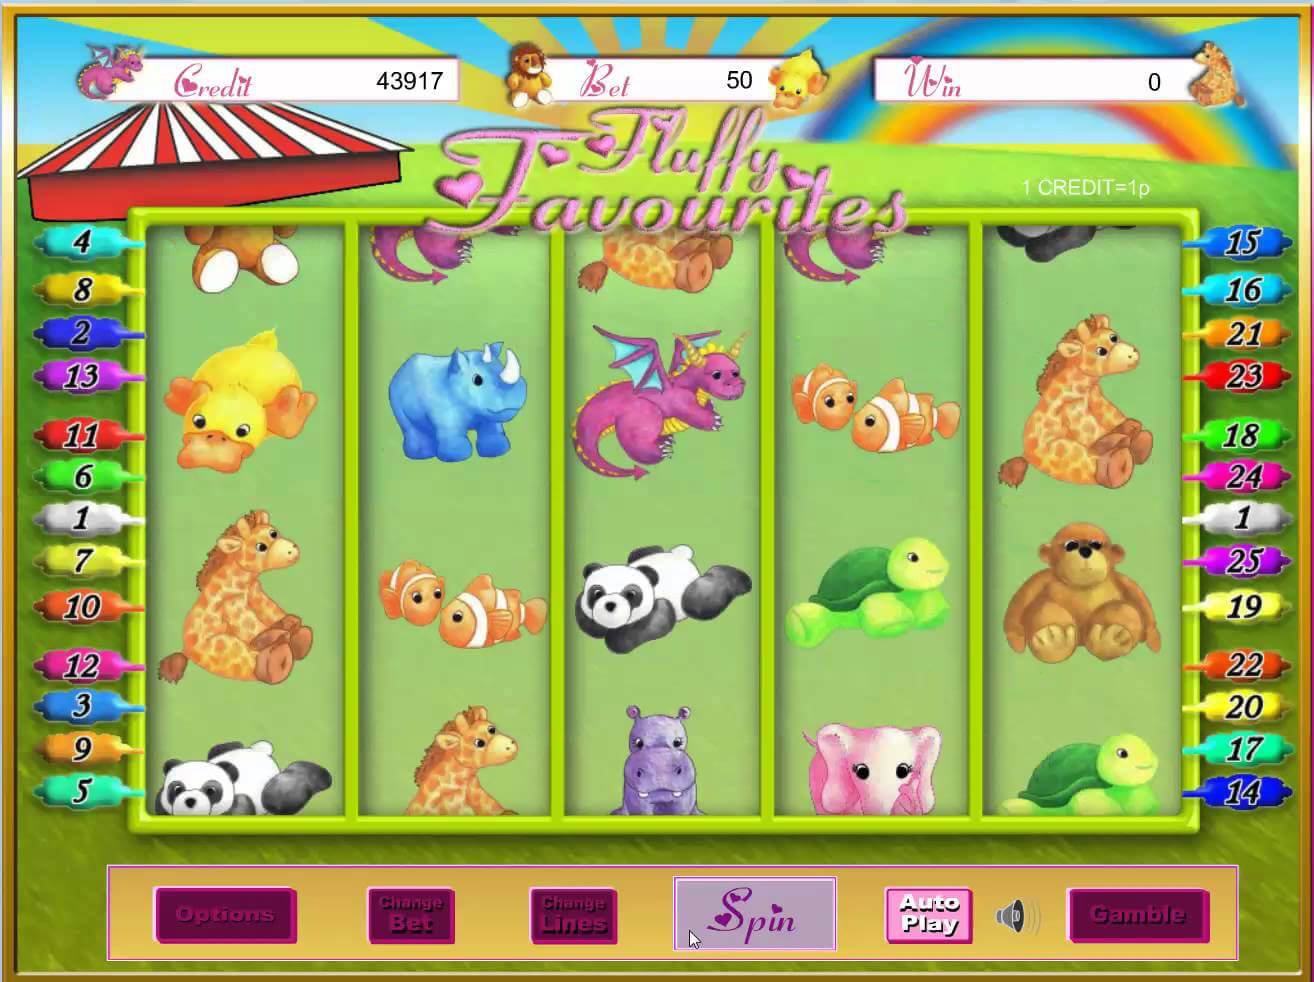 Fluffy favourites slots games